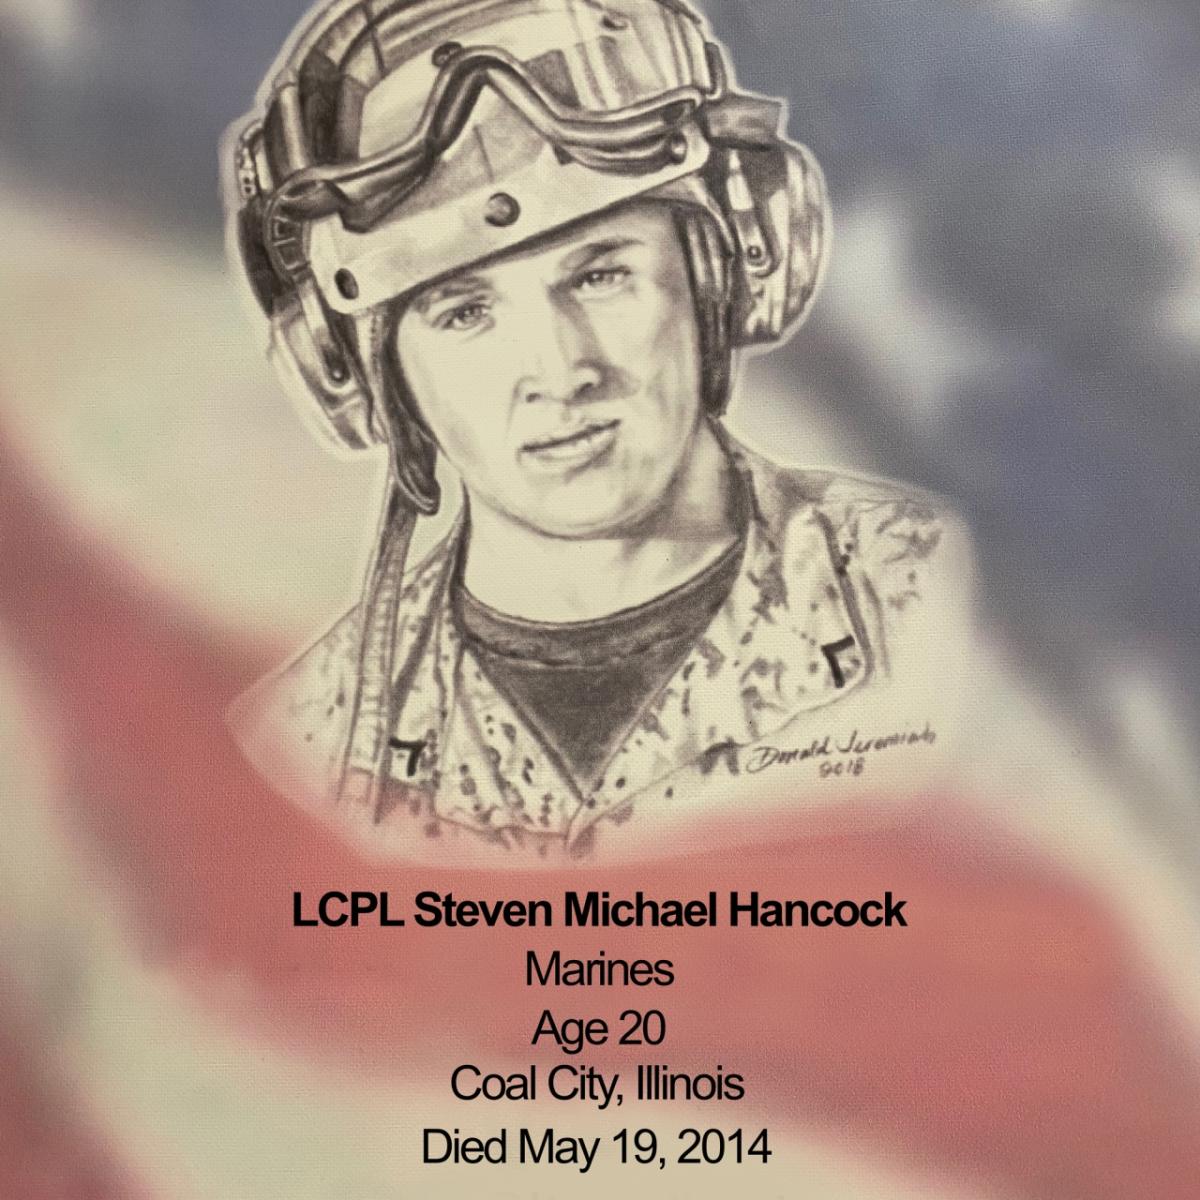 drawing of LCPL Steven Michael Hancock, Marines, Age 20, Coal City, Illinois, Died May 19, 2014